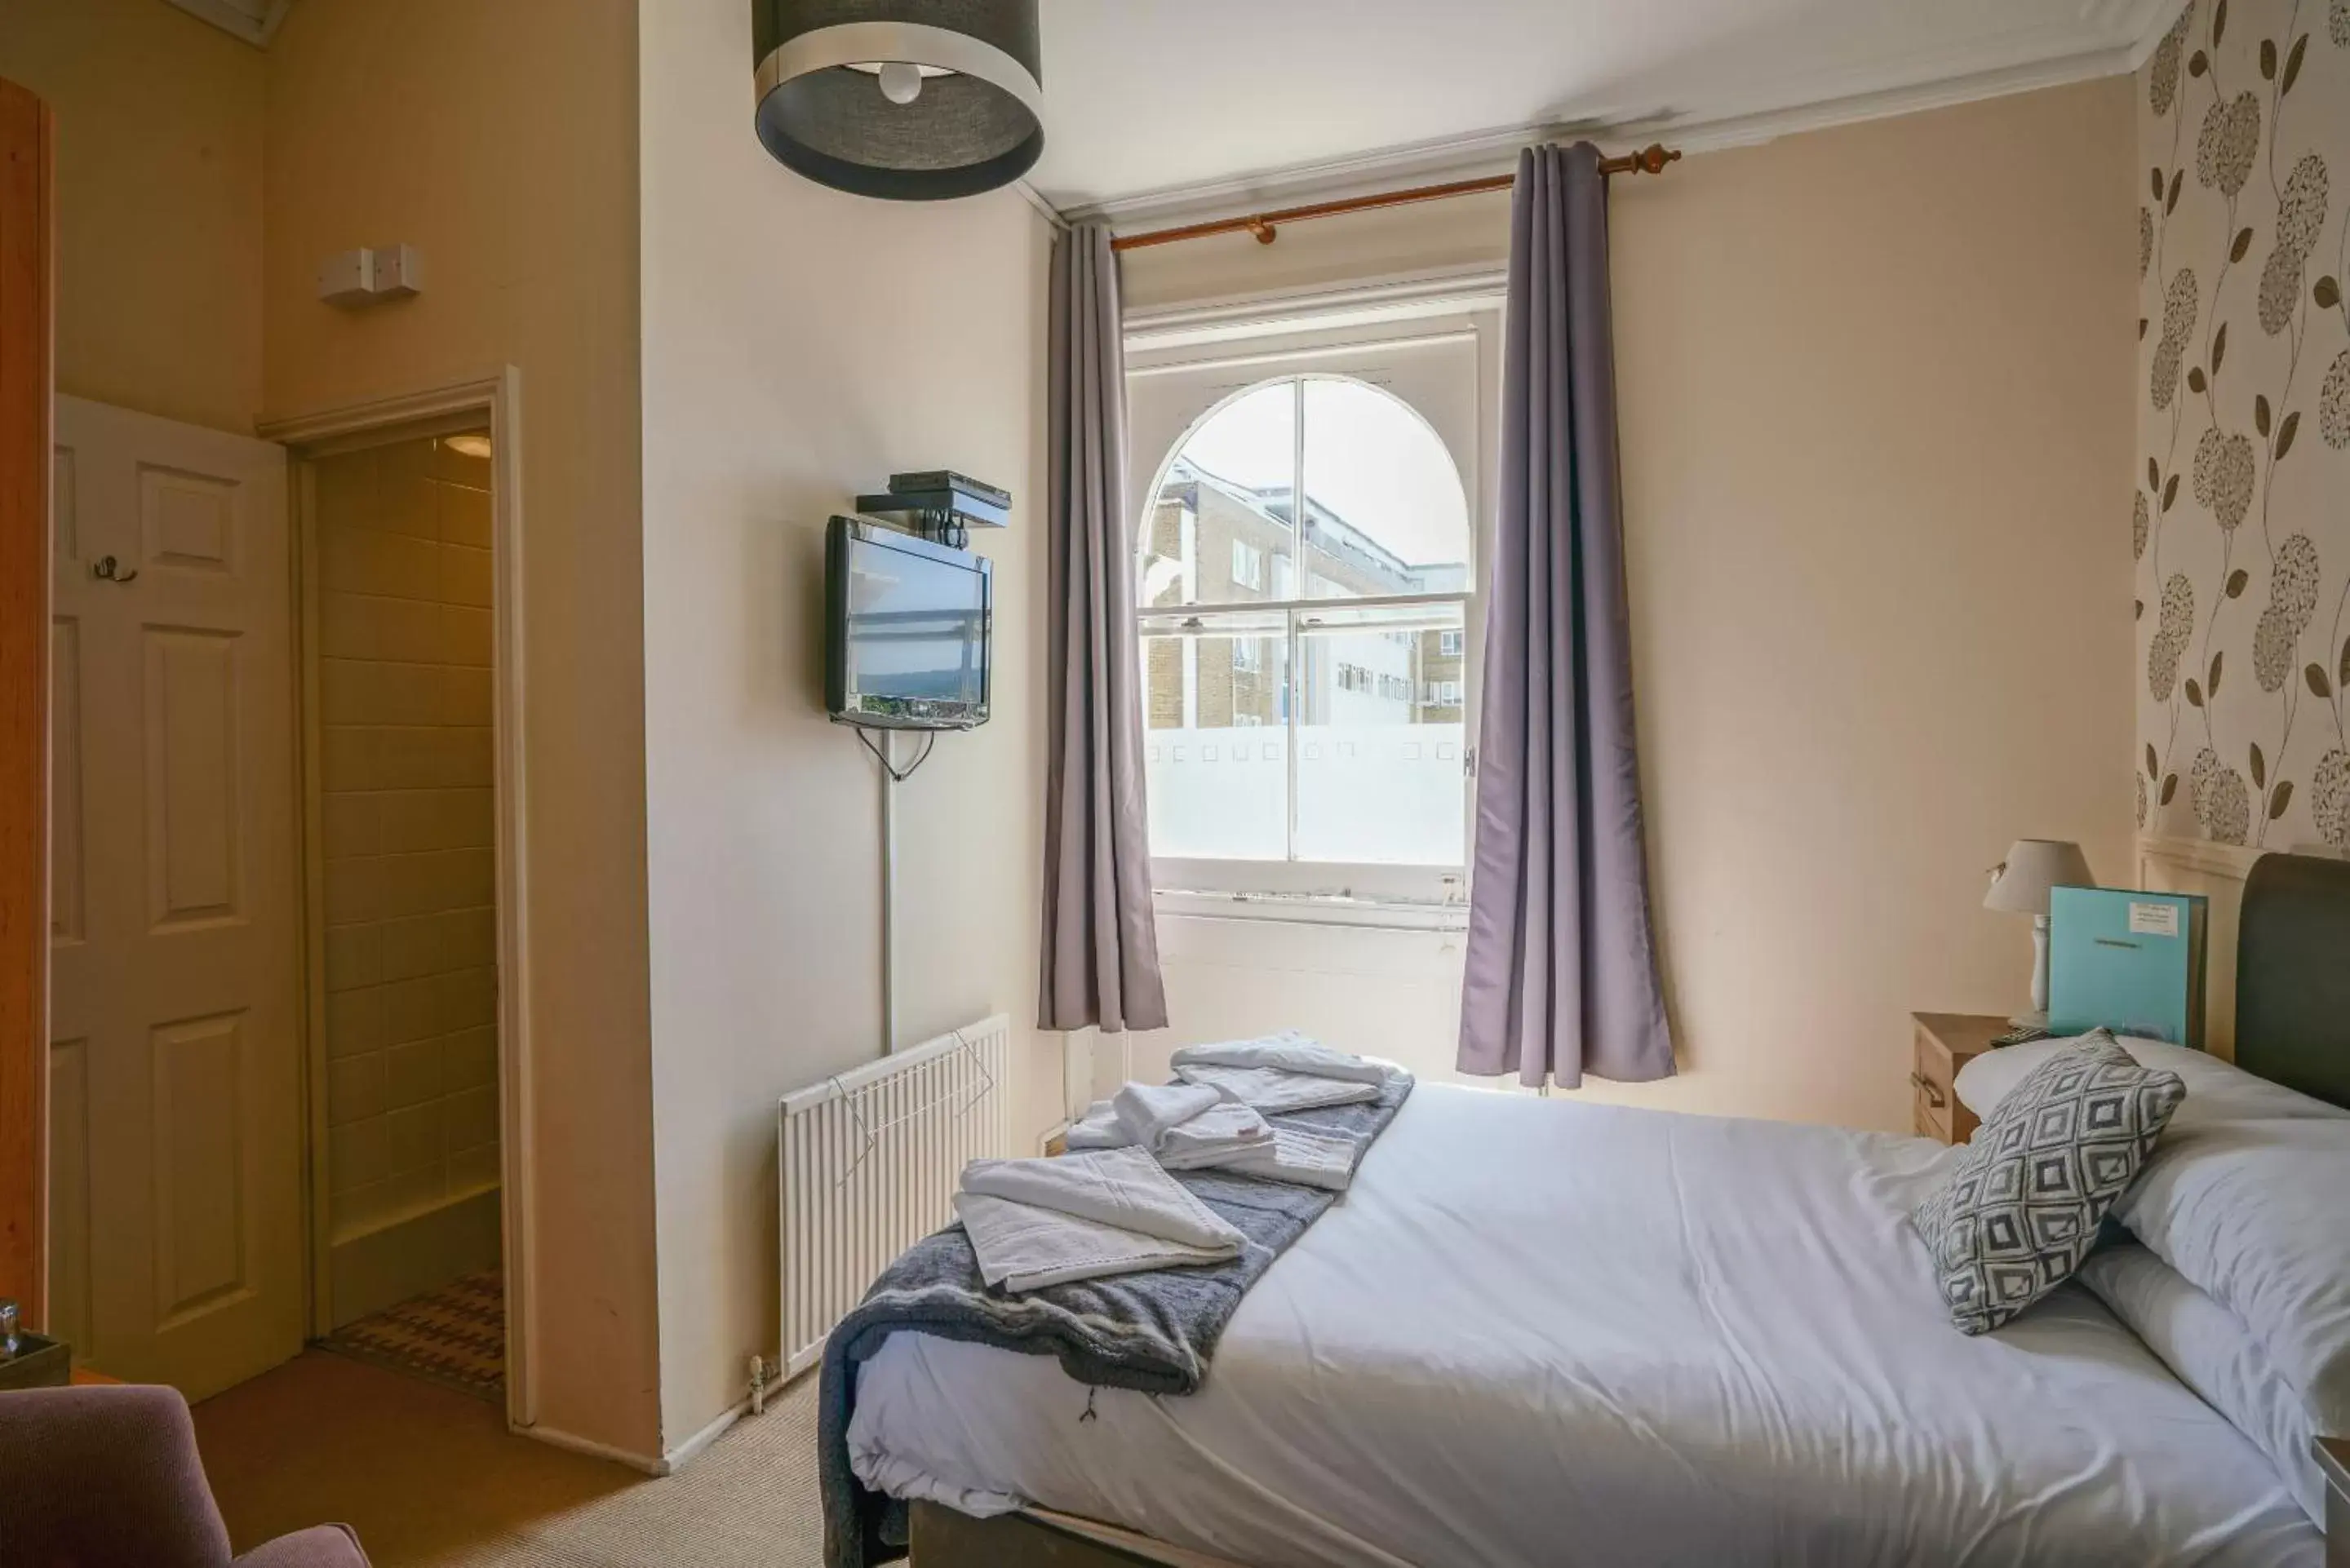 Budget Double Room in The Sheldon B&B - FREE private parking